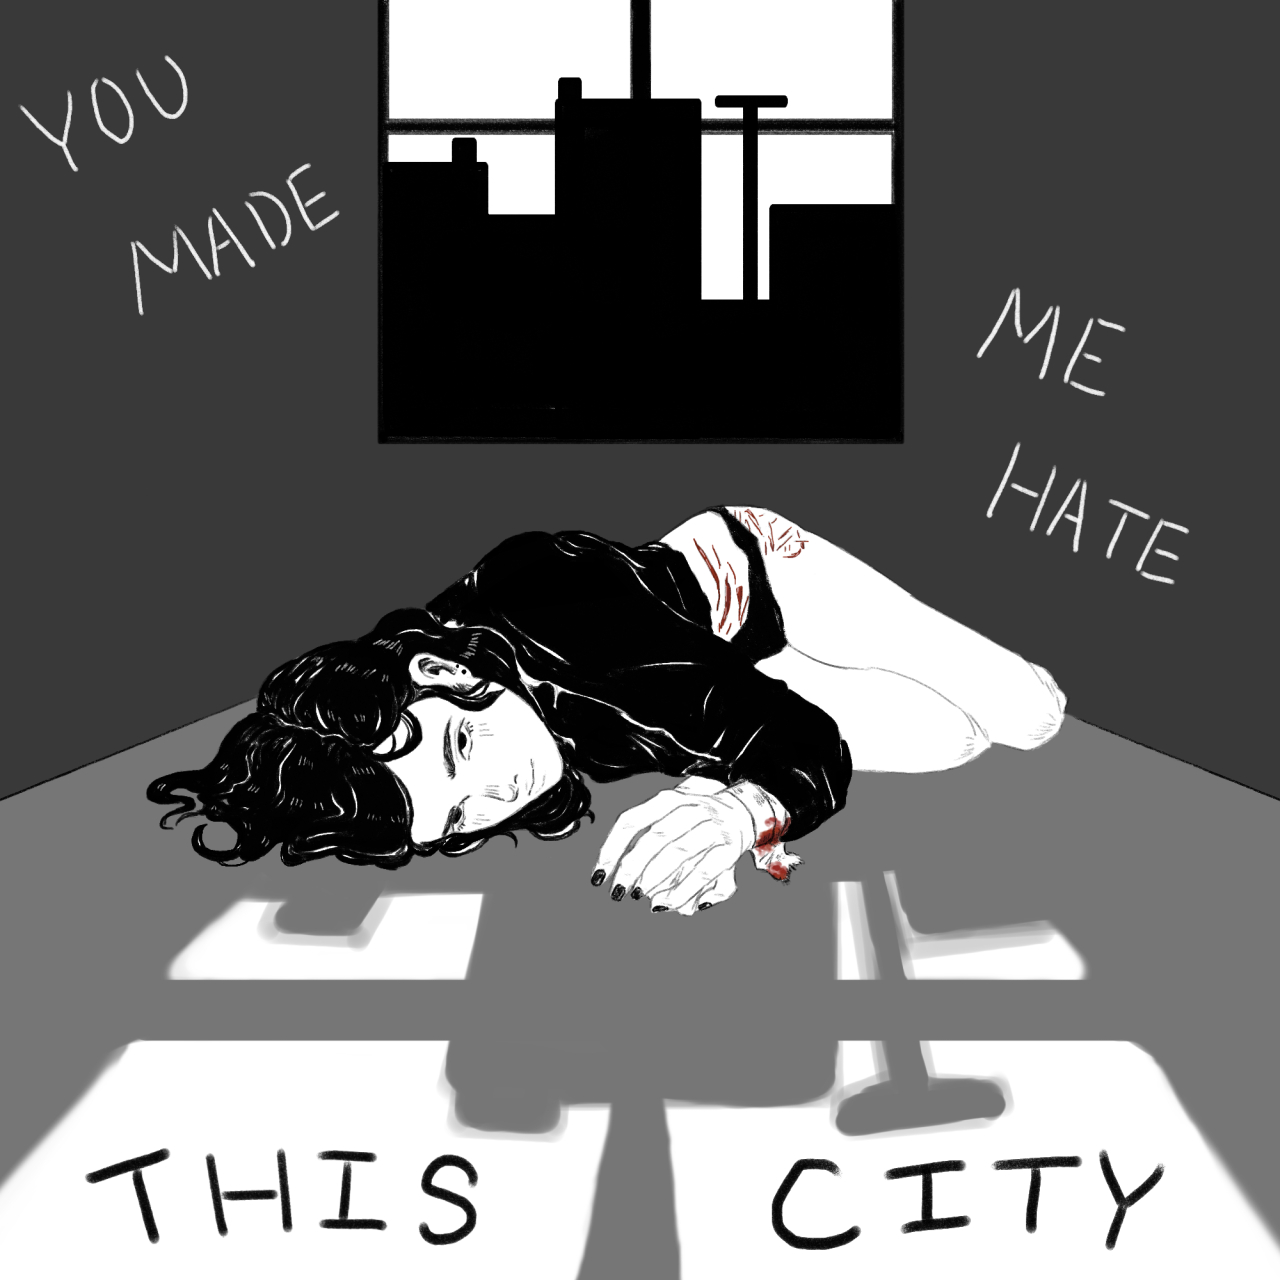 You made me hate this city